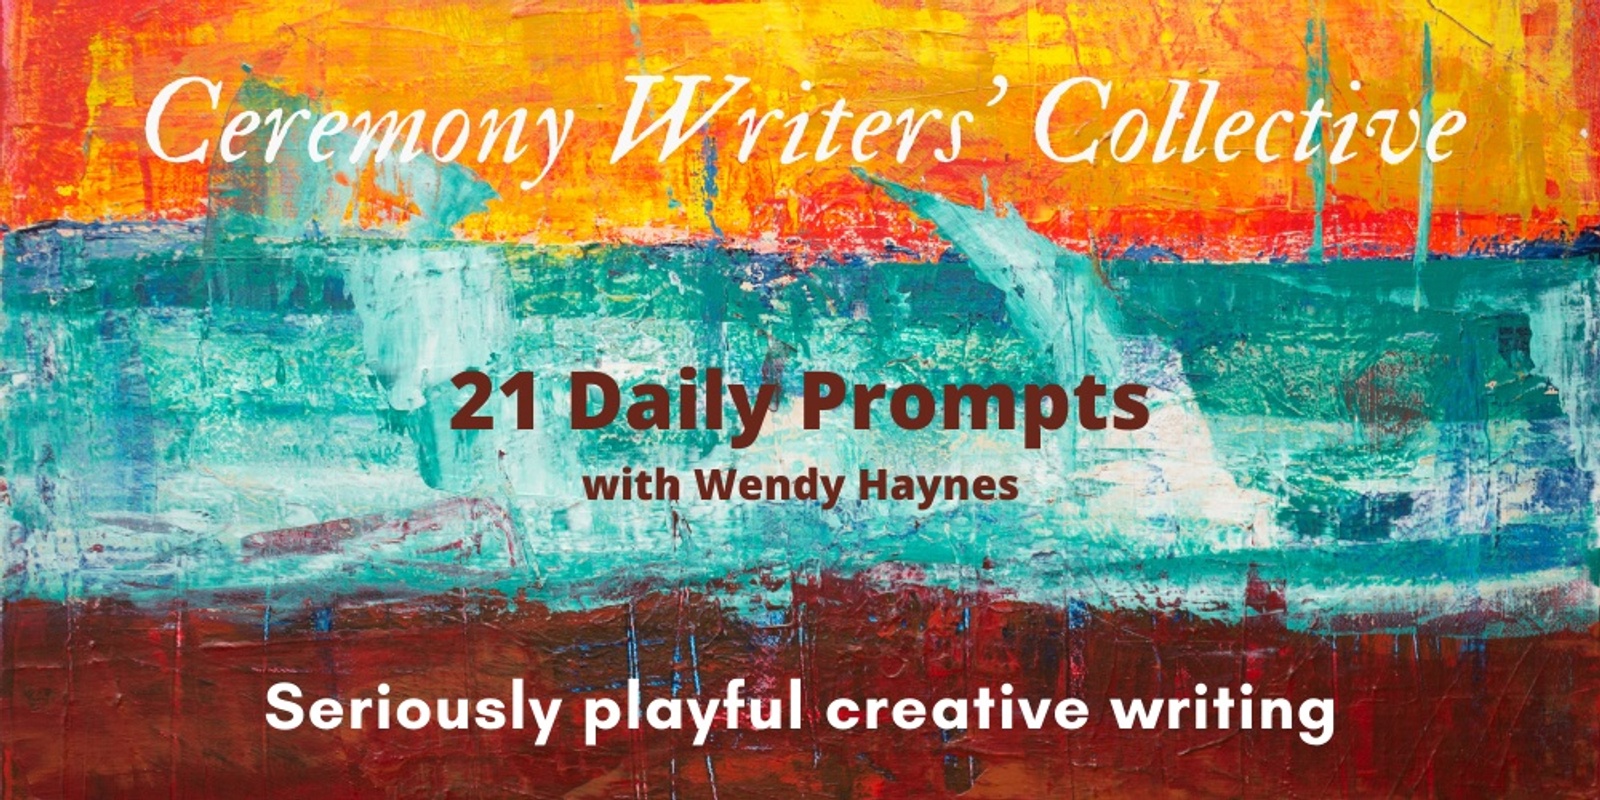 Banner image for Ceremony Writers' Collective